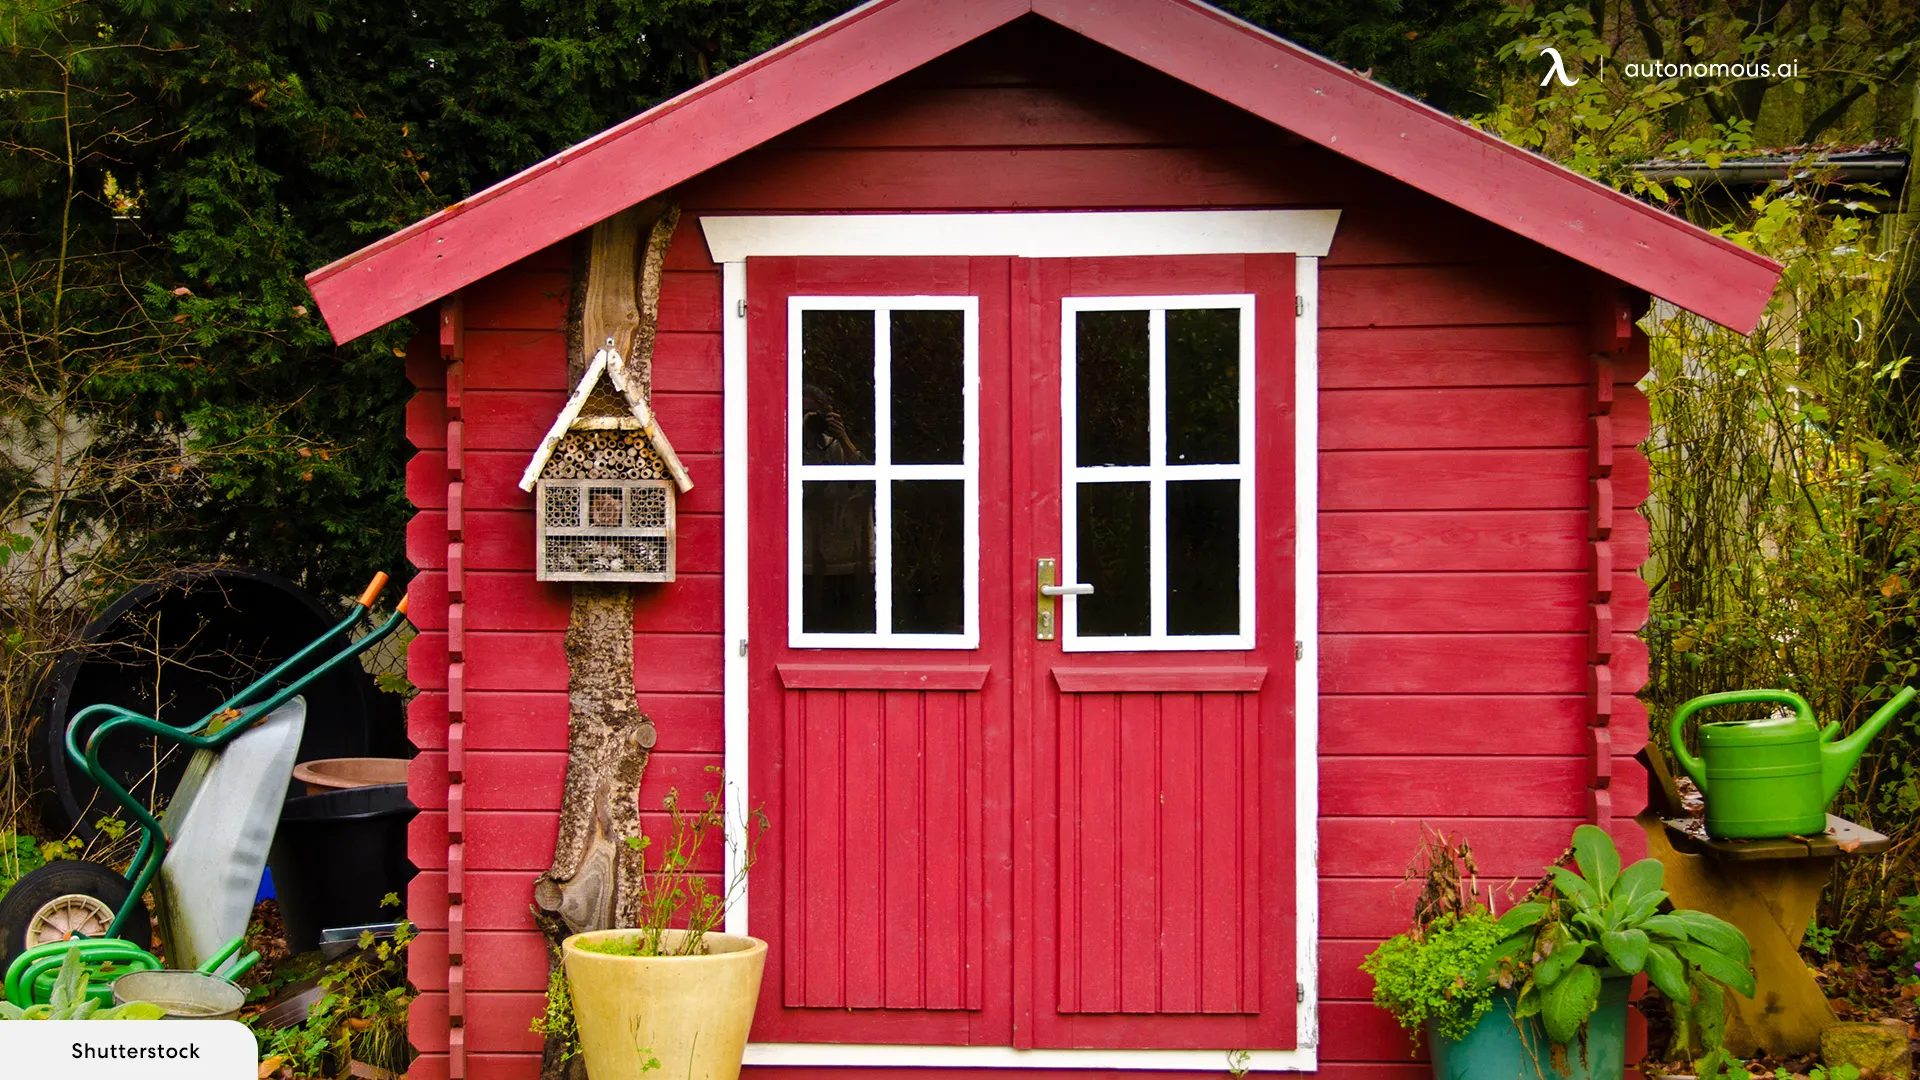 Shed Paint Recommendations: A Guide on How to Repaint Your Backyard Shed